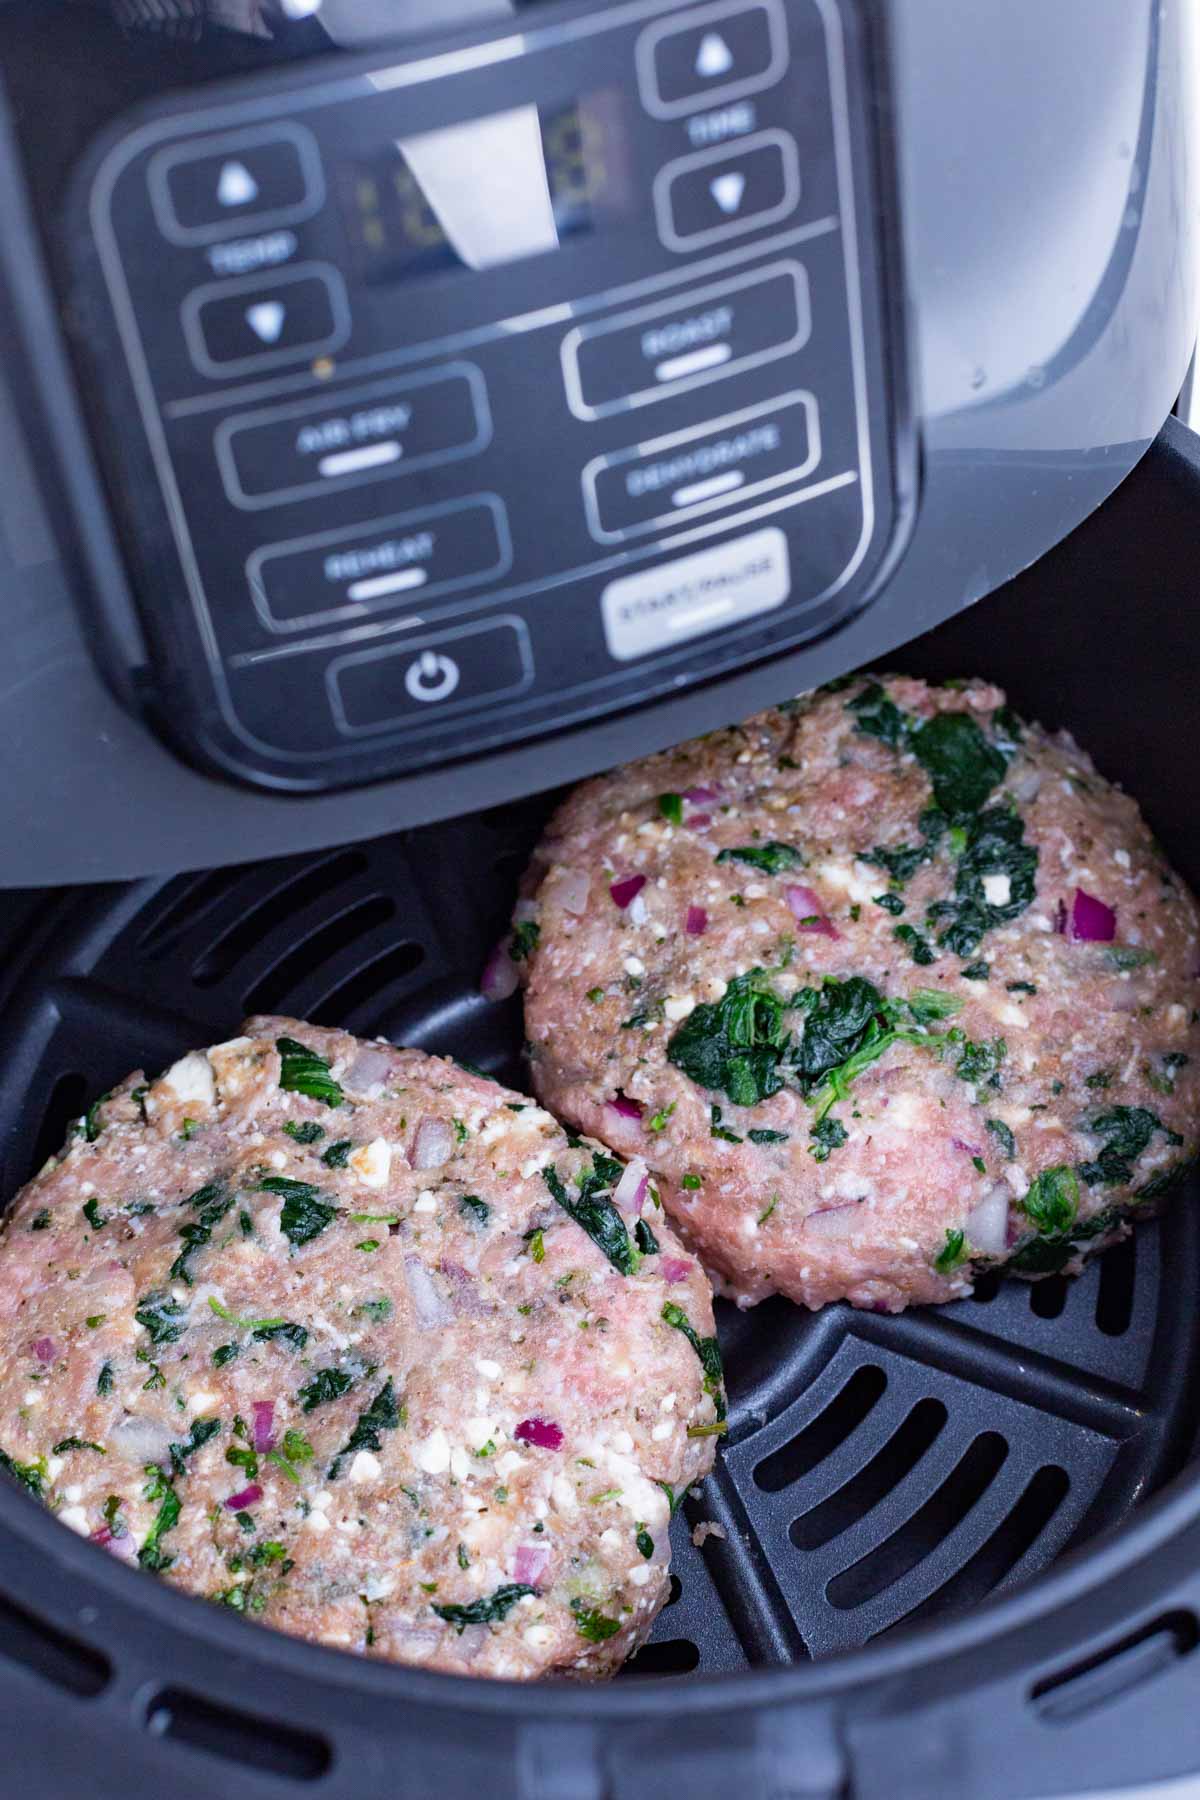 Burger patties are placed in an air fryer.